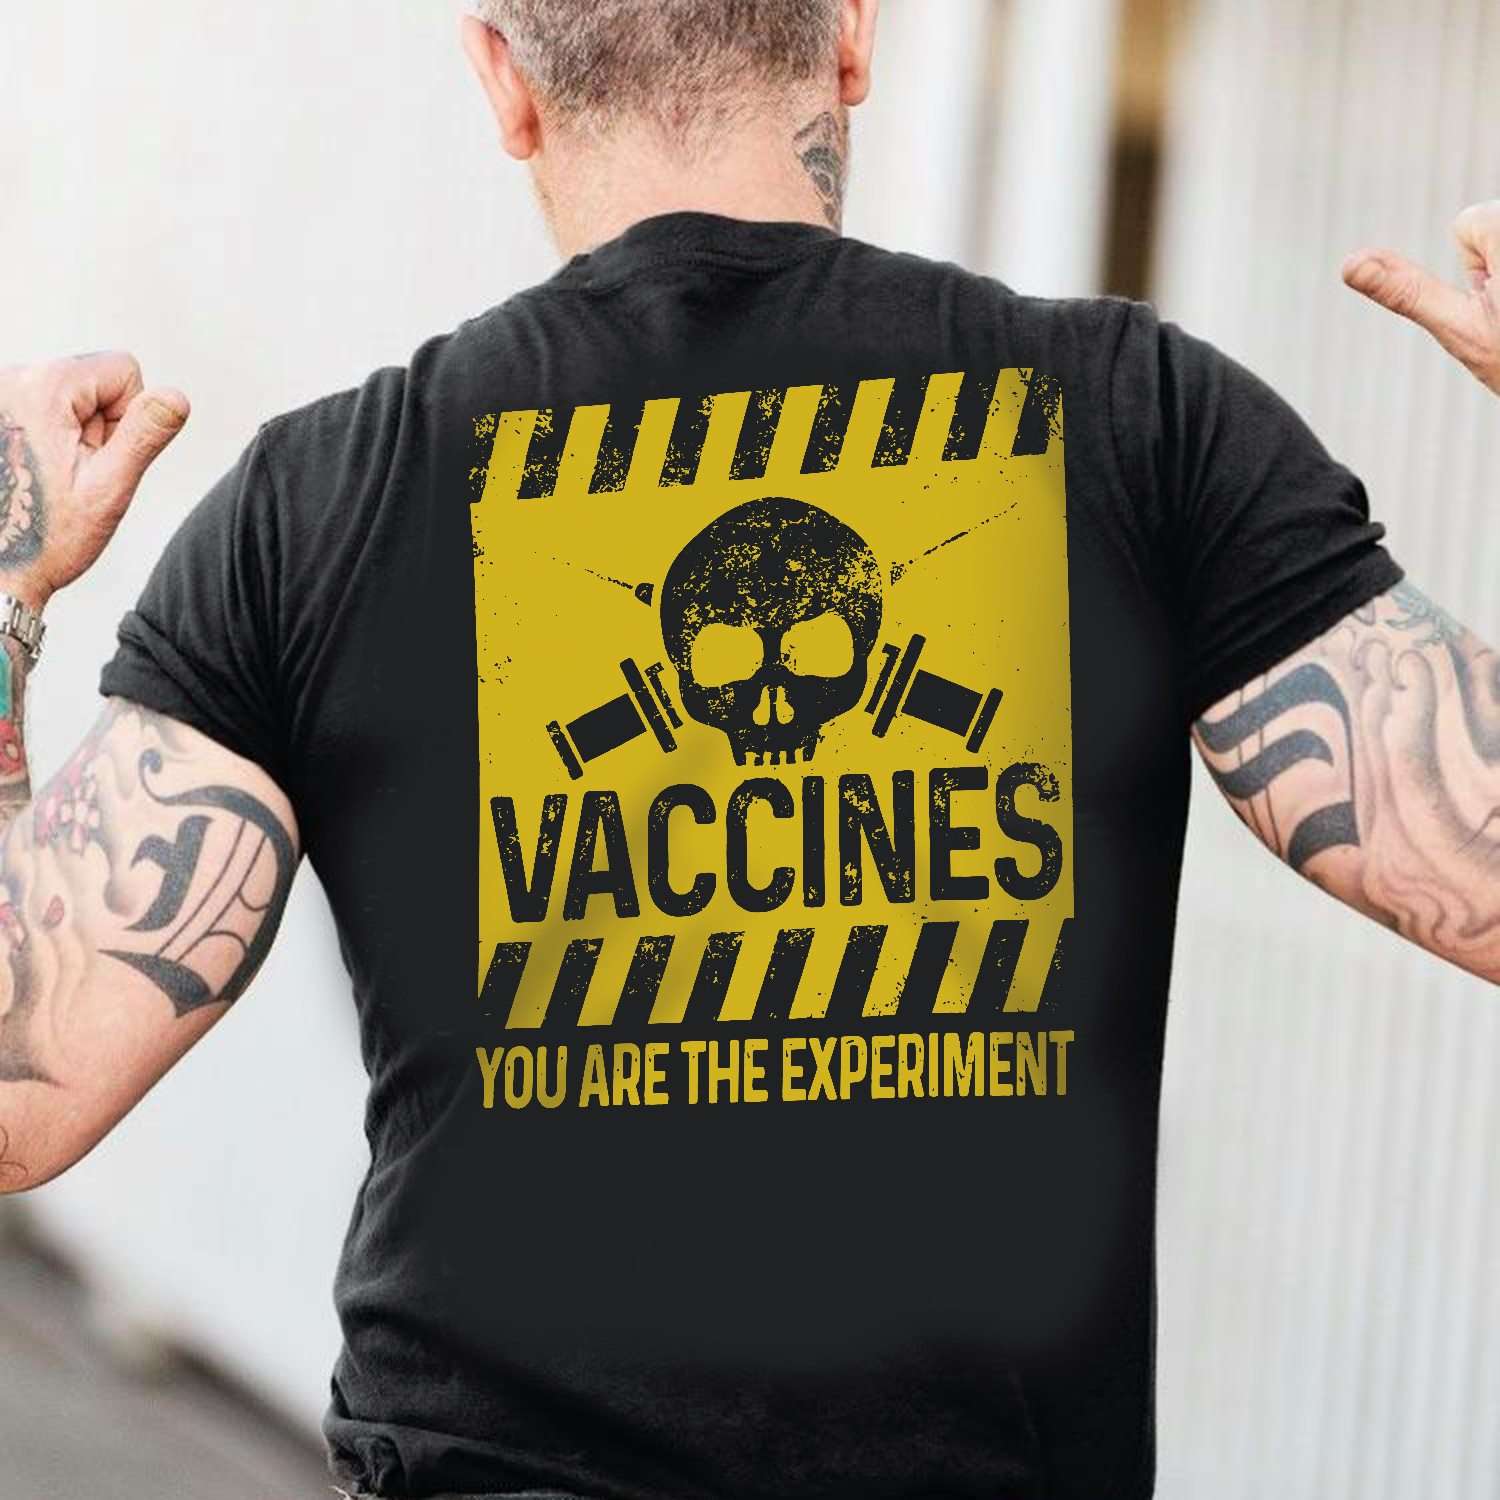 Vaccines you are the experiment - Anti vaccines trend, vaccines kill